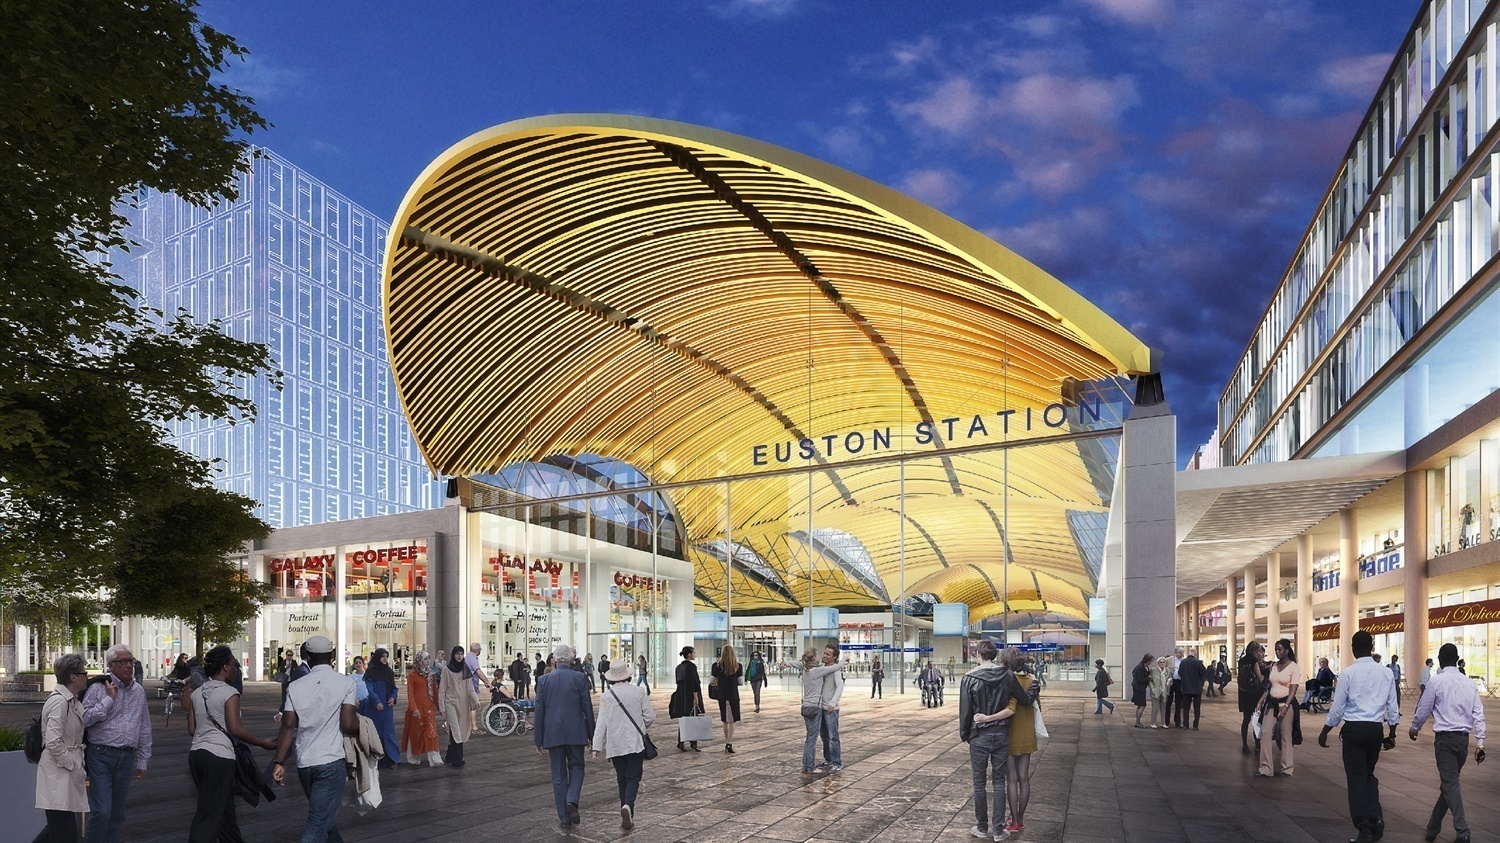 Duo of shortlists revealed for HS2 station design and master development contracts